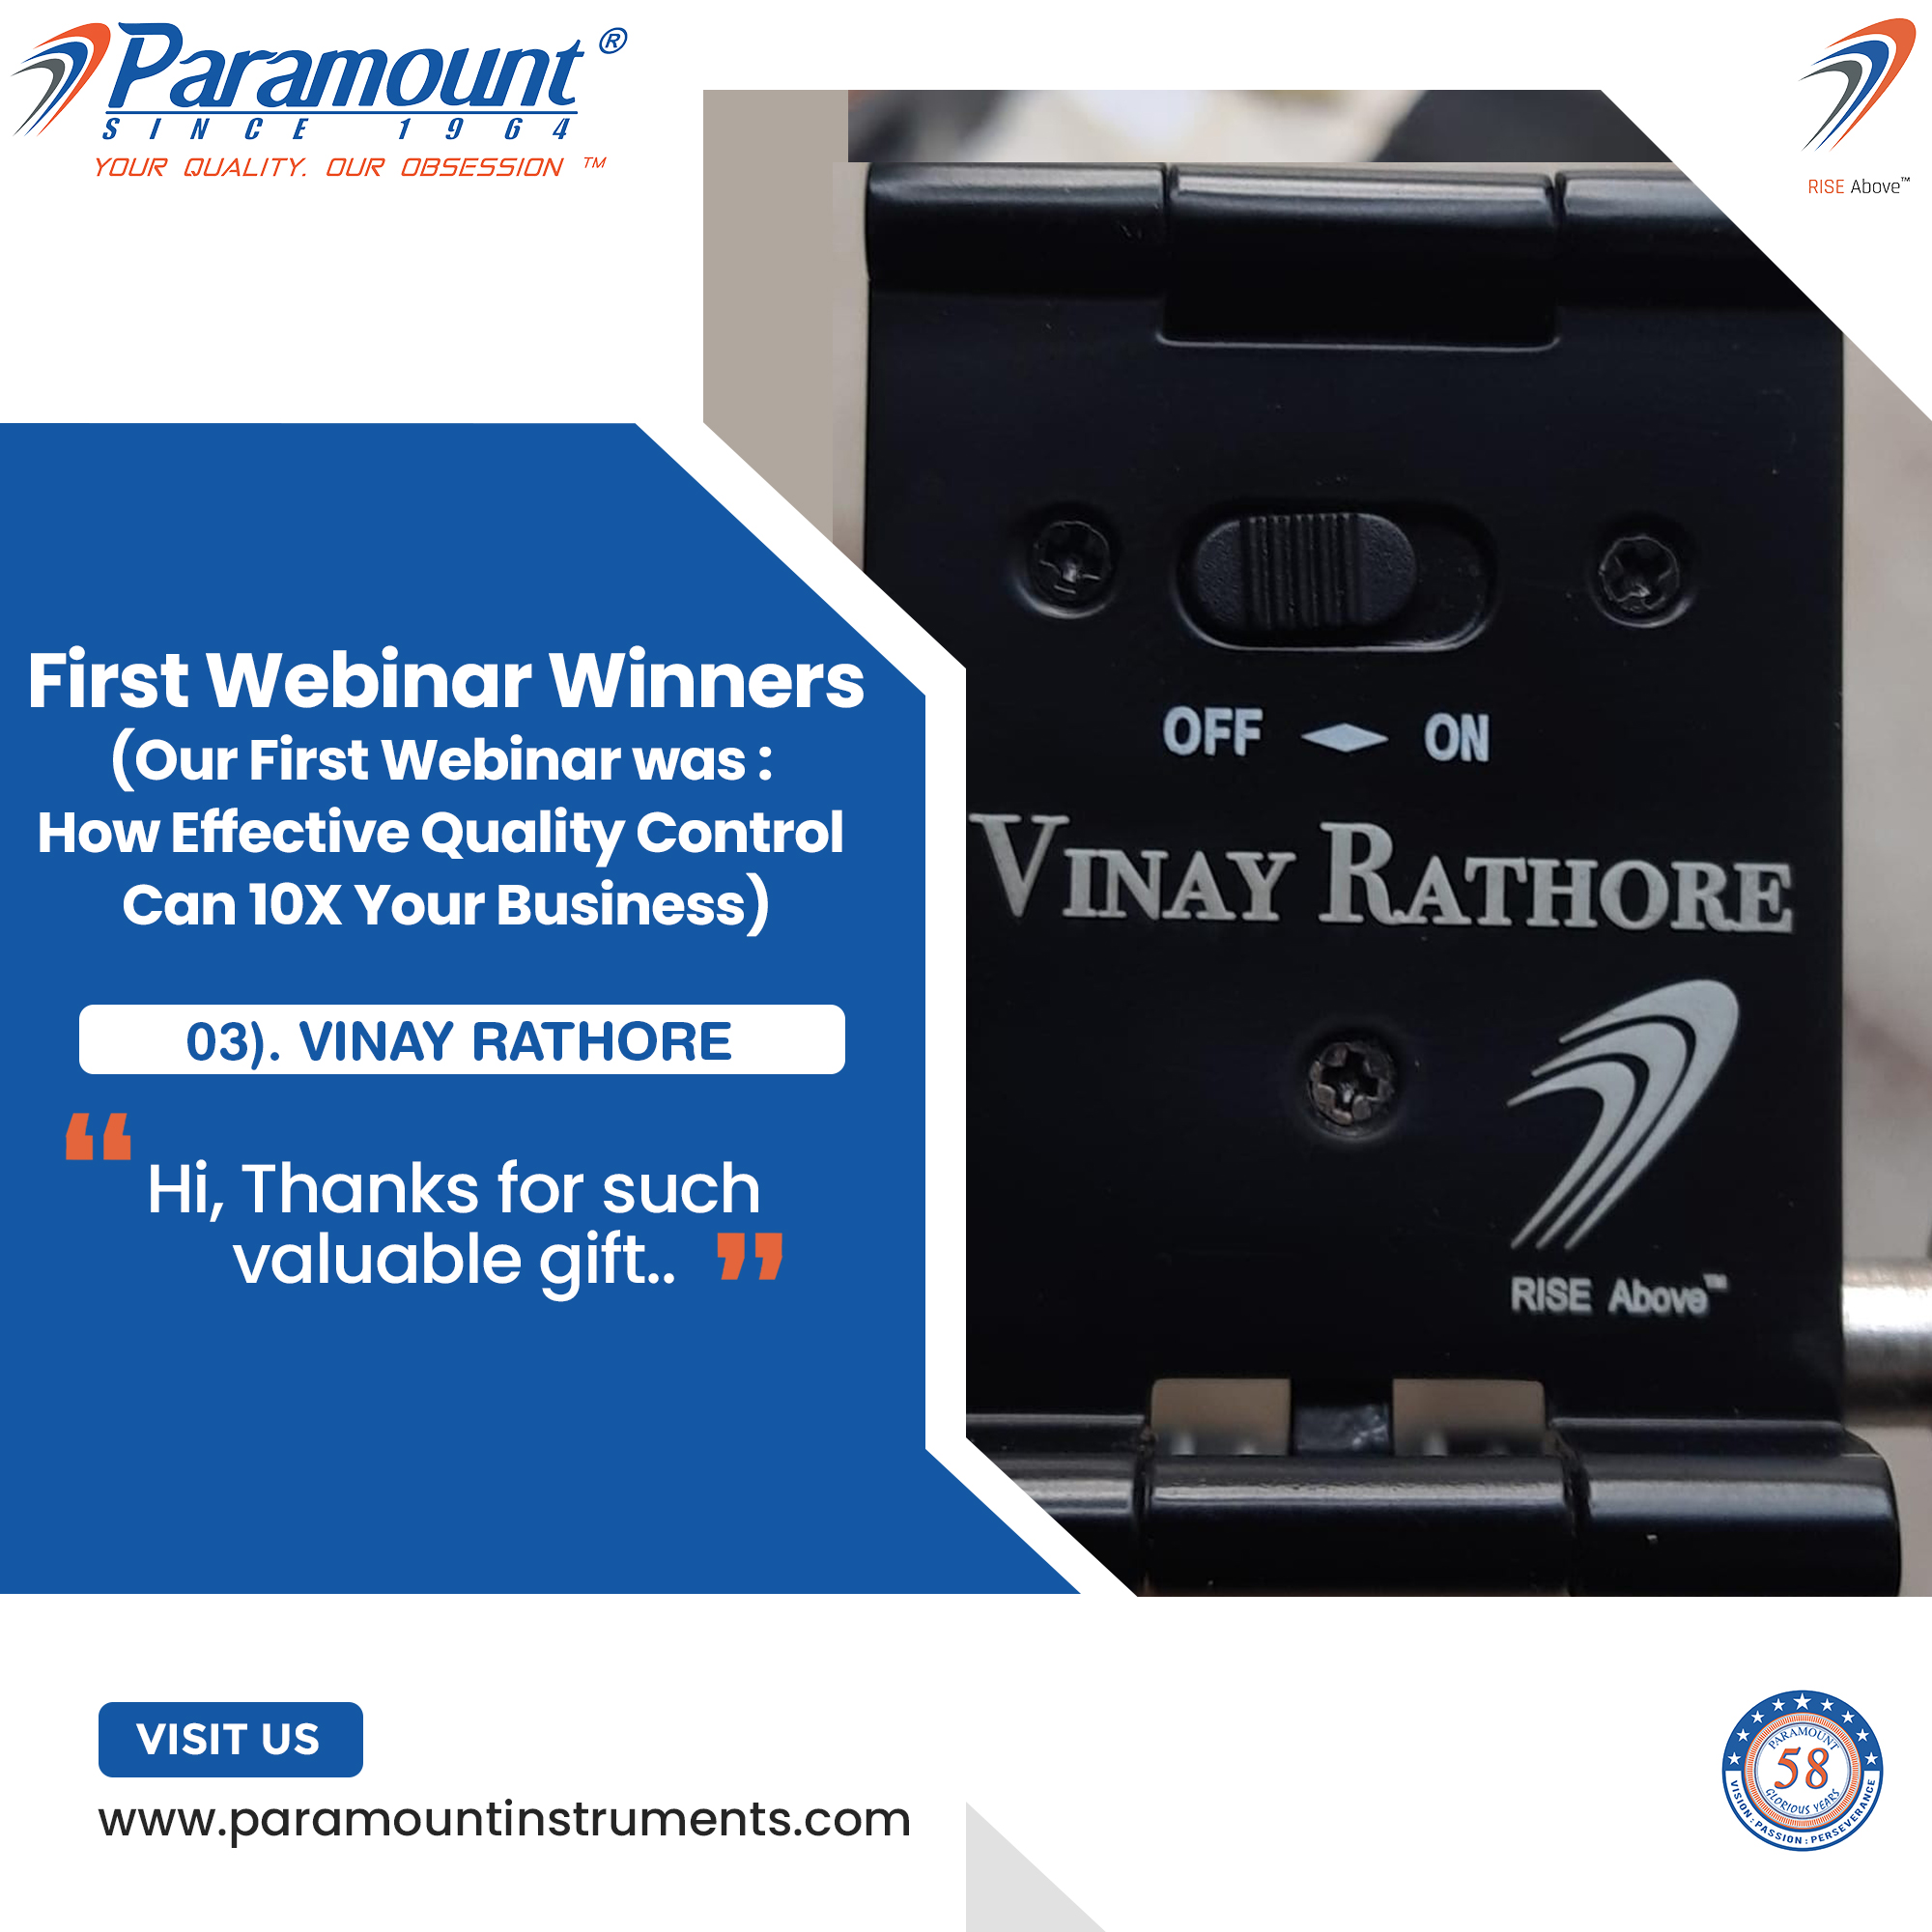 7 Paramount ©

/I NV CF 1 9 6 4

YOUR QUALITY. OUR OBSESSION ™

        
     
  
    
  
 

First Webinar Winners
(Our First Webinar was :
How Effective Quality Control A \

Can 10X Your Business)

03). VINAY RATHORE

Hi, Thanks for such
valuable gift..

OFF = ON

ssia<r D
IN A X | NATE HO RE

VISIT US

www.paramountinstruments.com